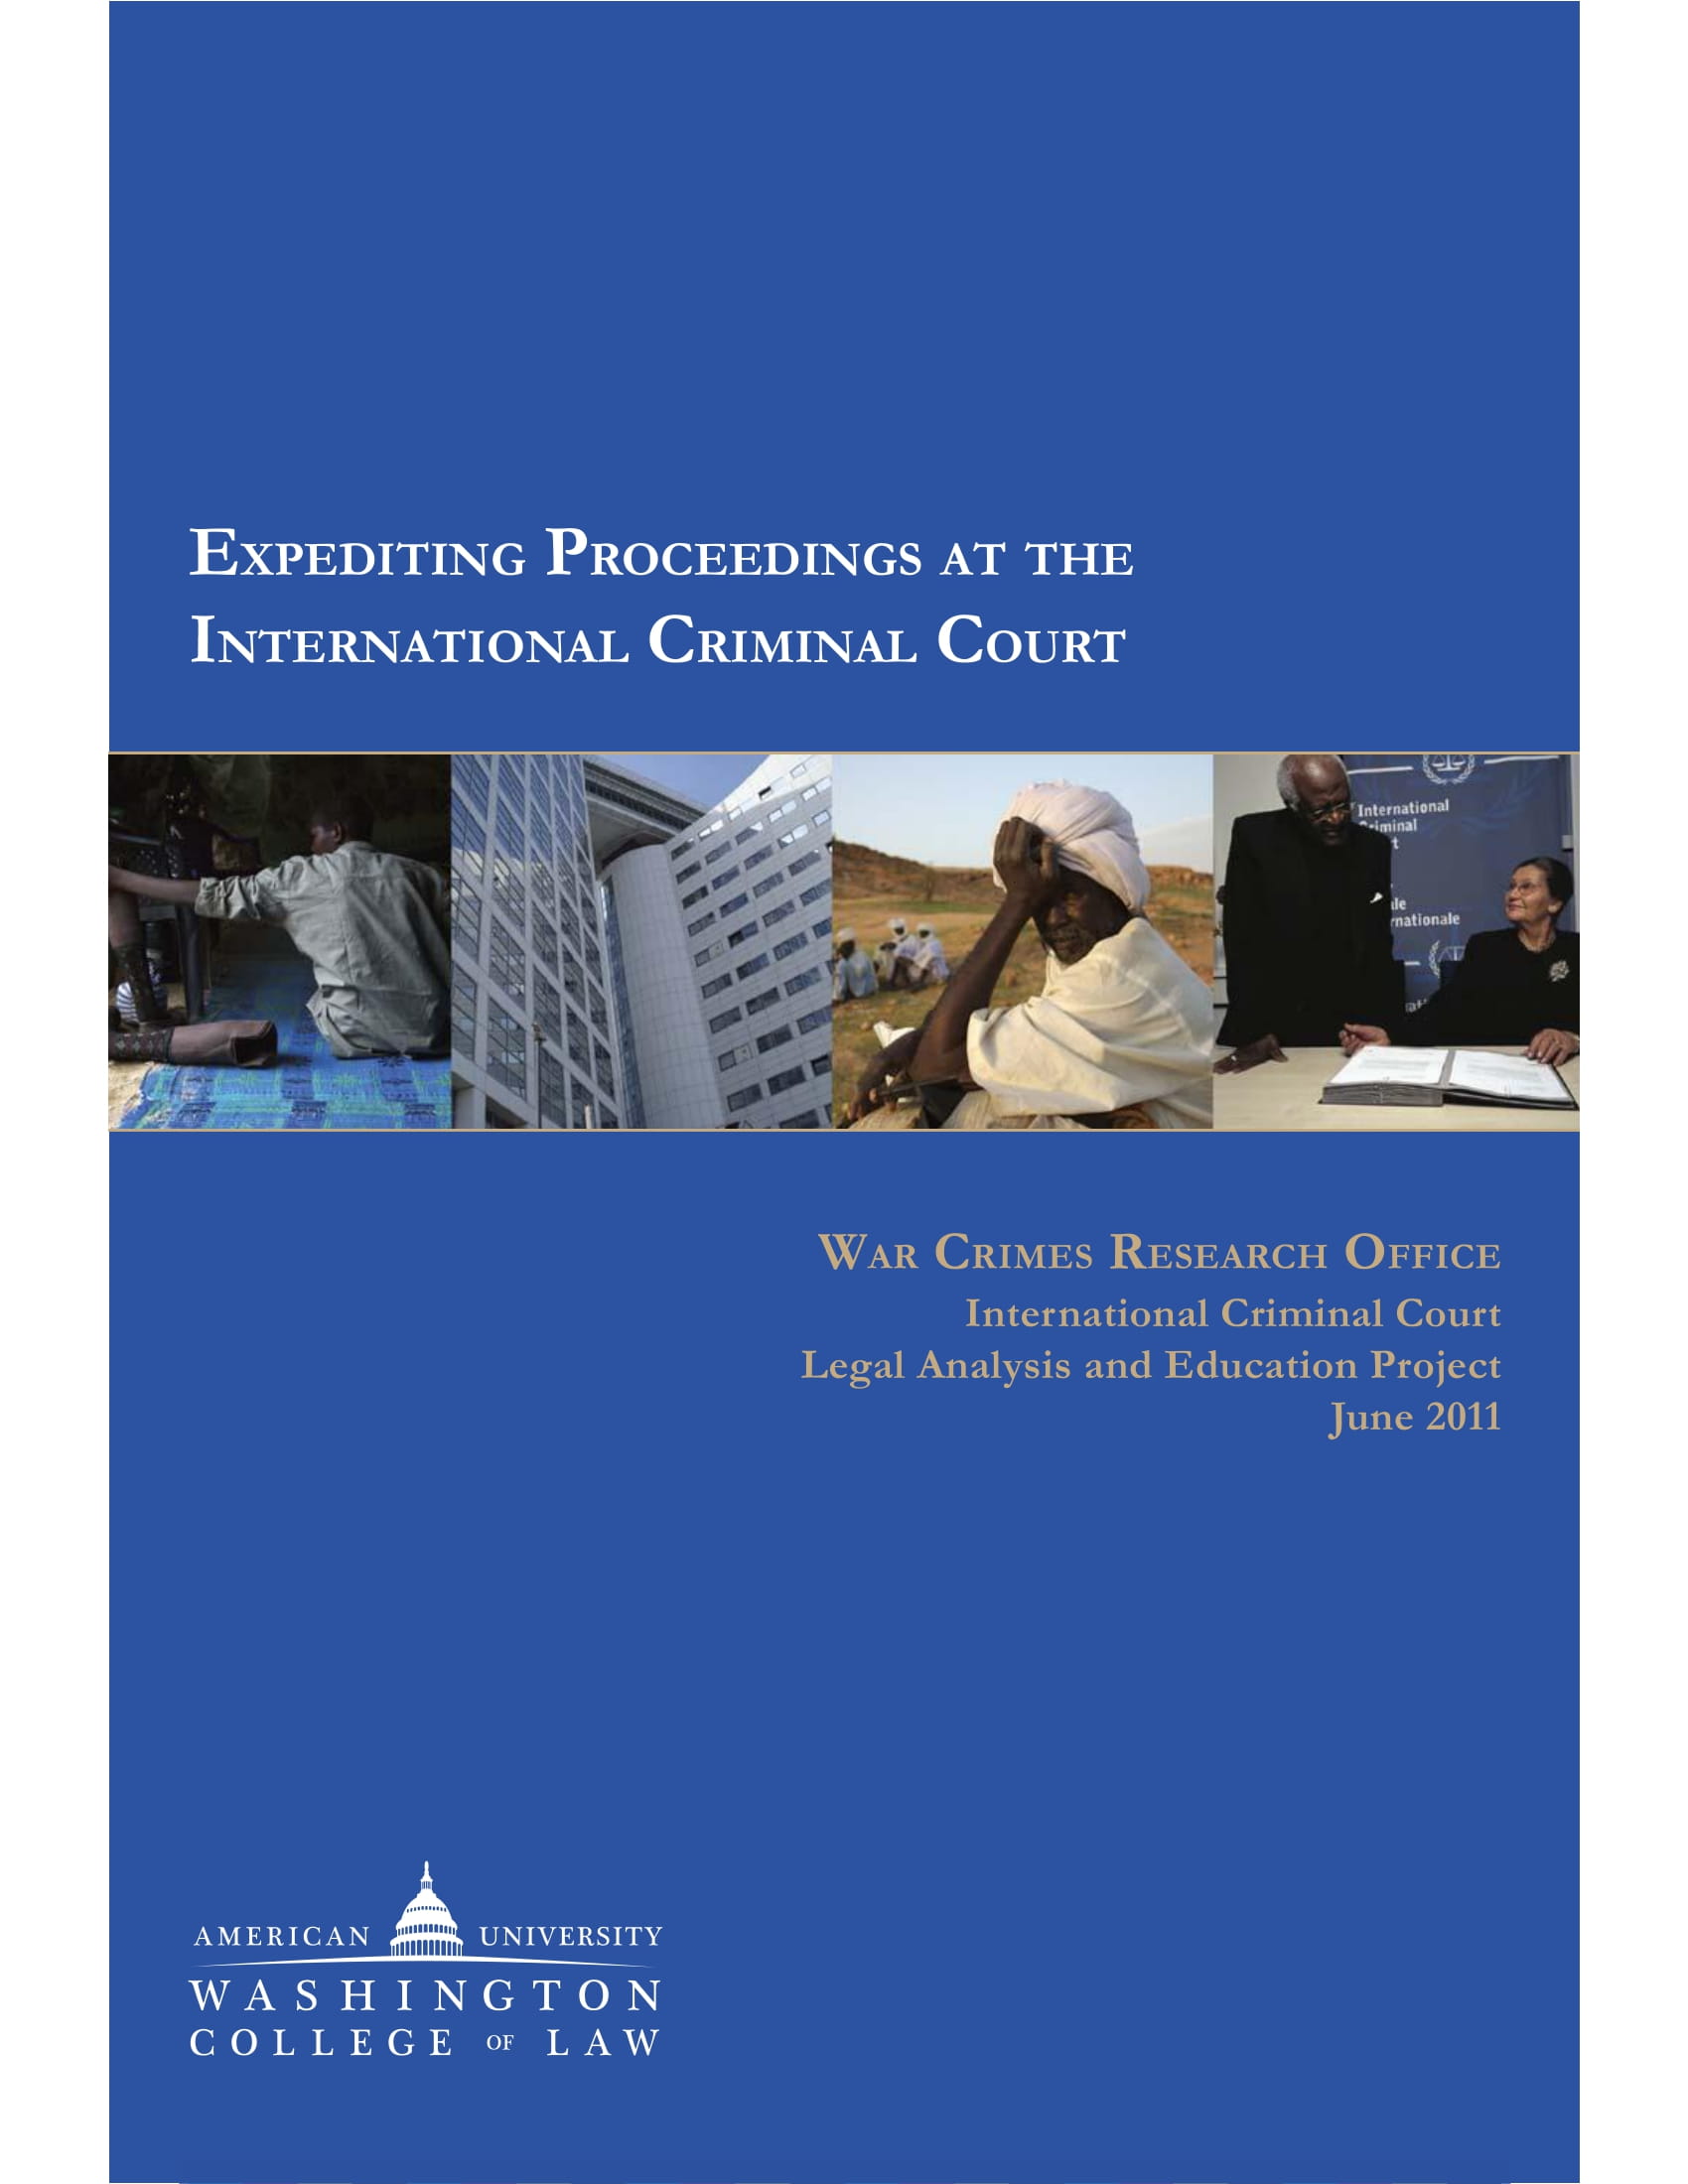 Report 14: Expediting Proceedings at the International Criminal Court